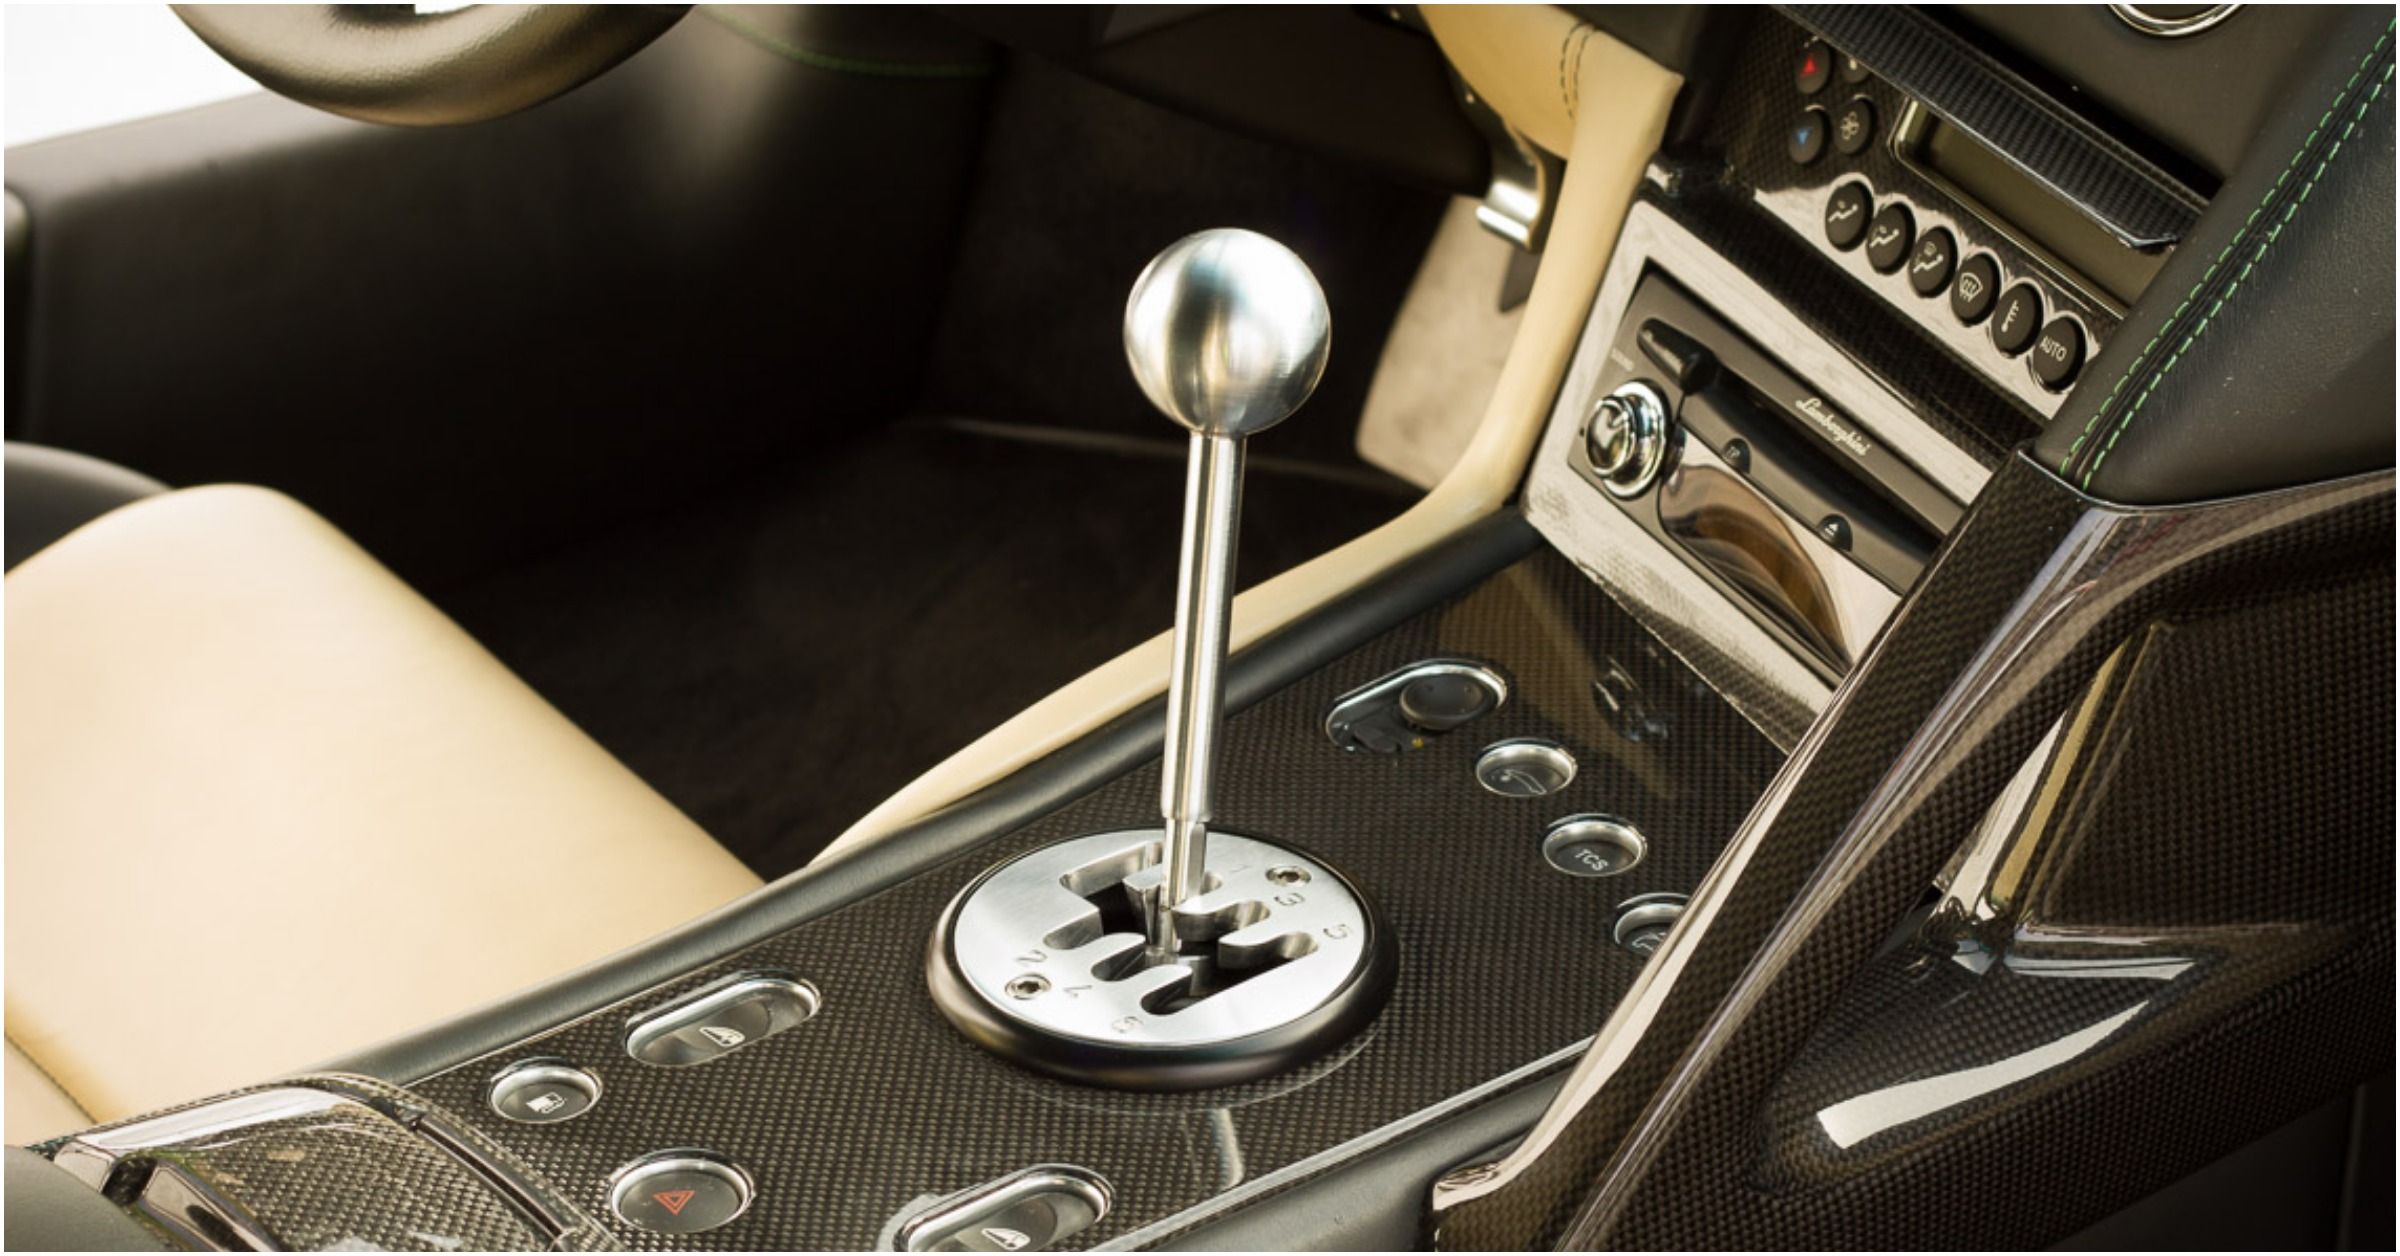 15 Things You Didn’t Know About Manual Transmissions | HotCars